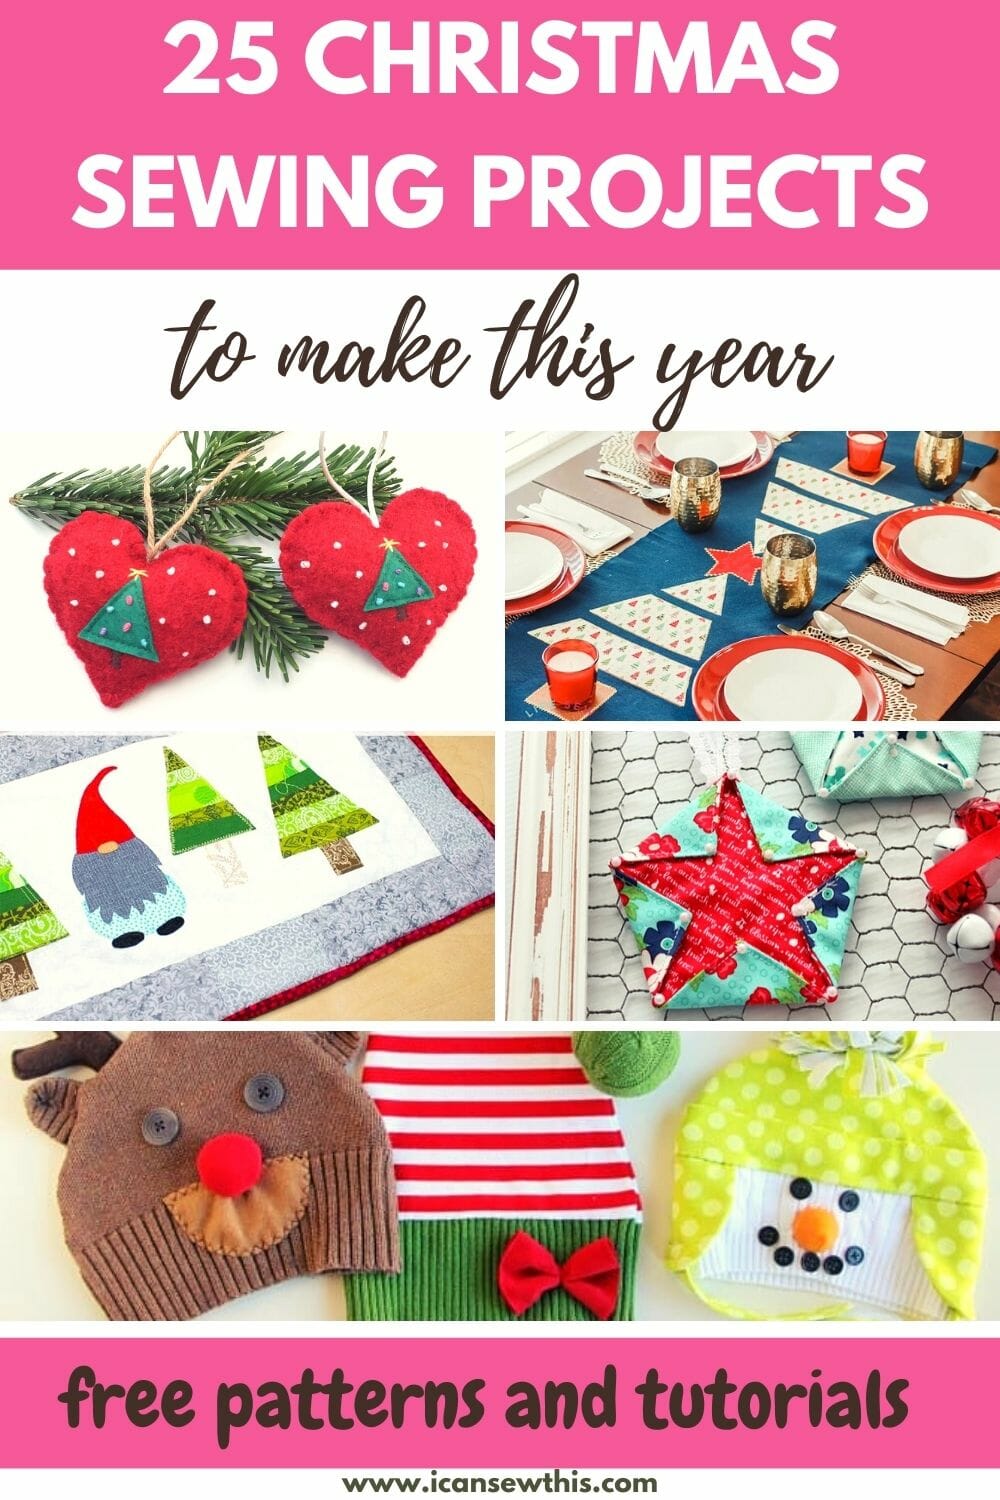 Christmas Sewing Projects for Kids with FREE Patterns